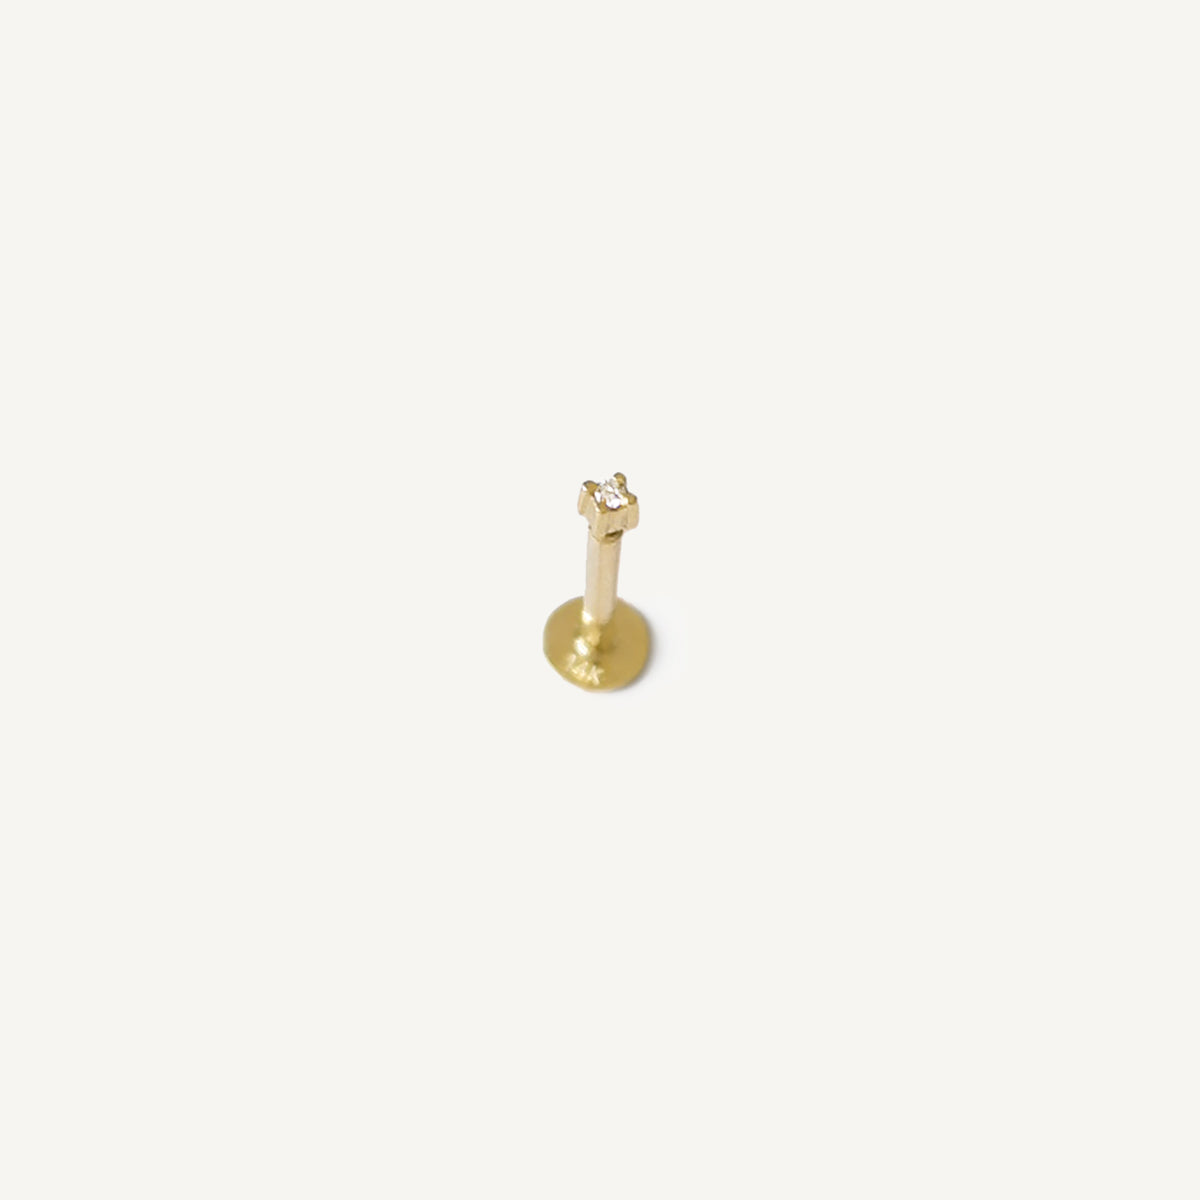 The Tiny Birthstone Flat Back Earrings in Solid Gold